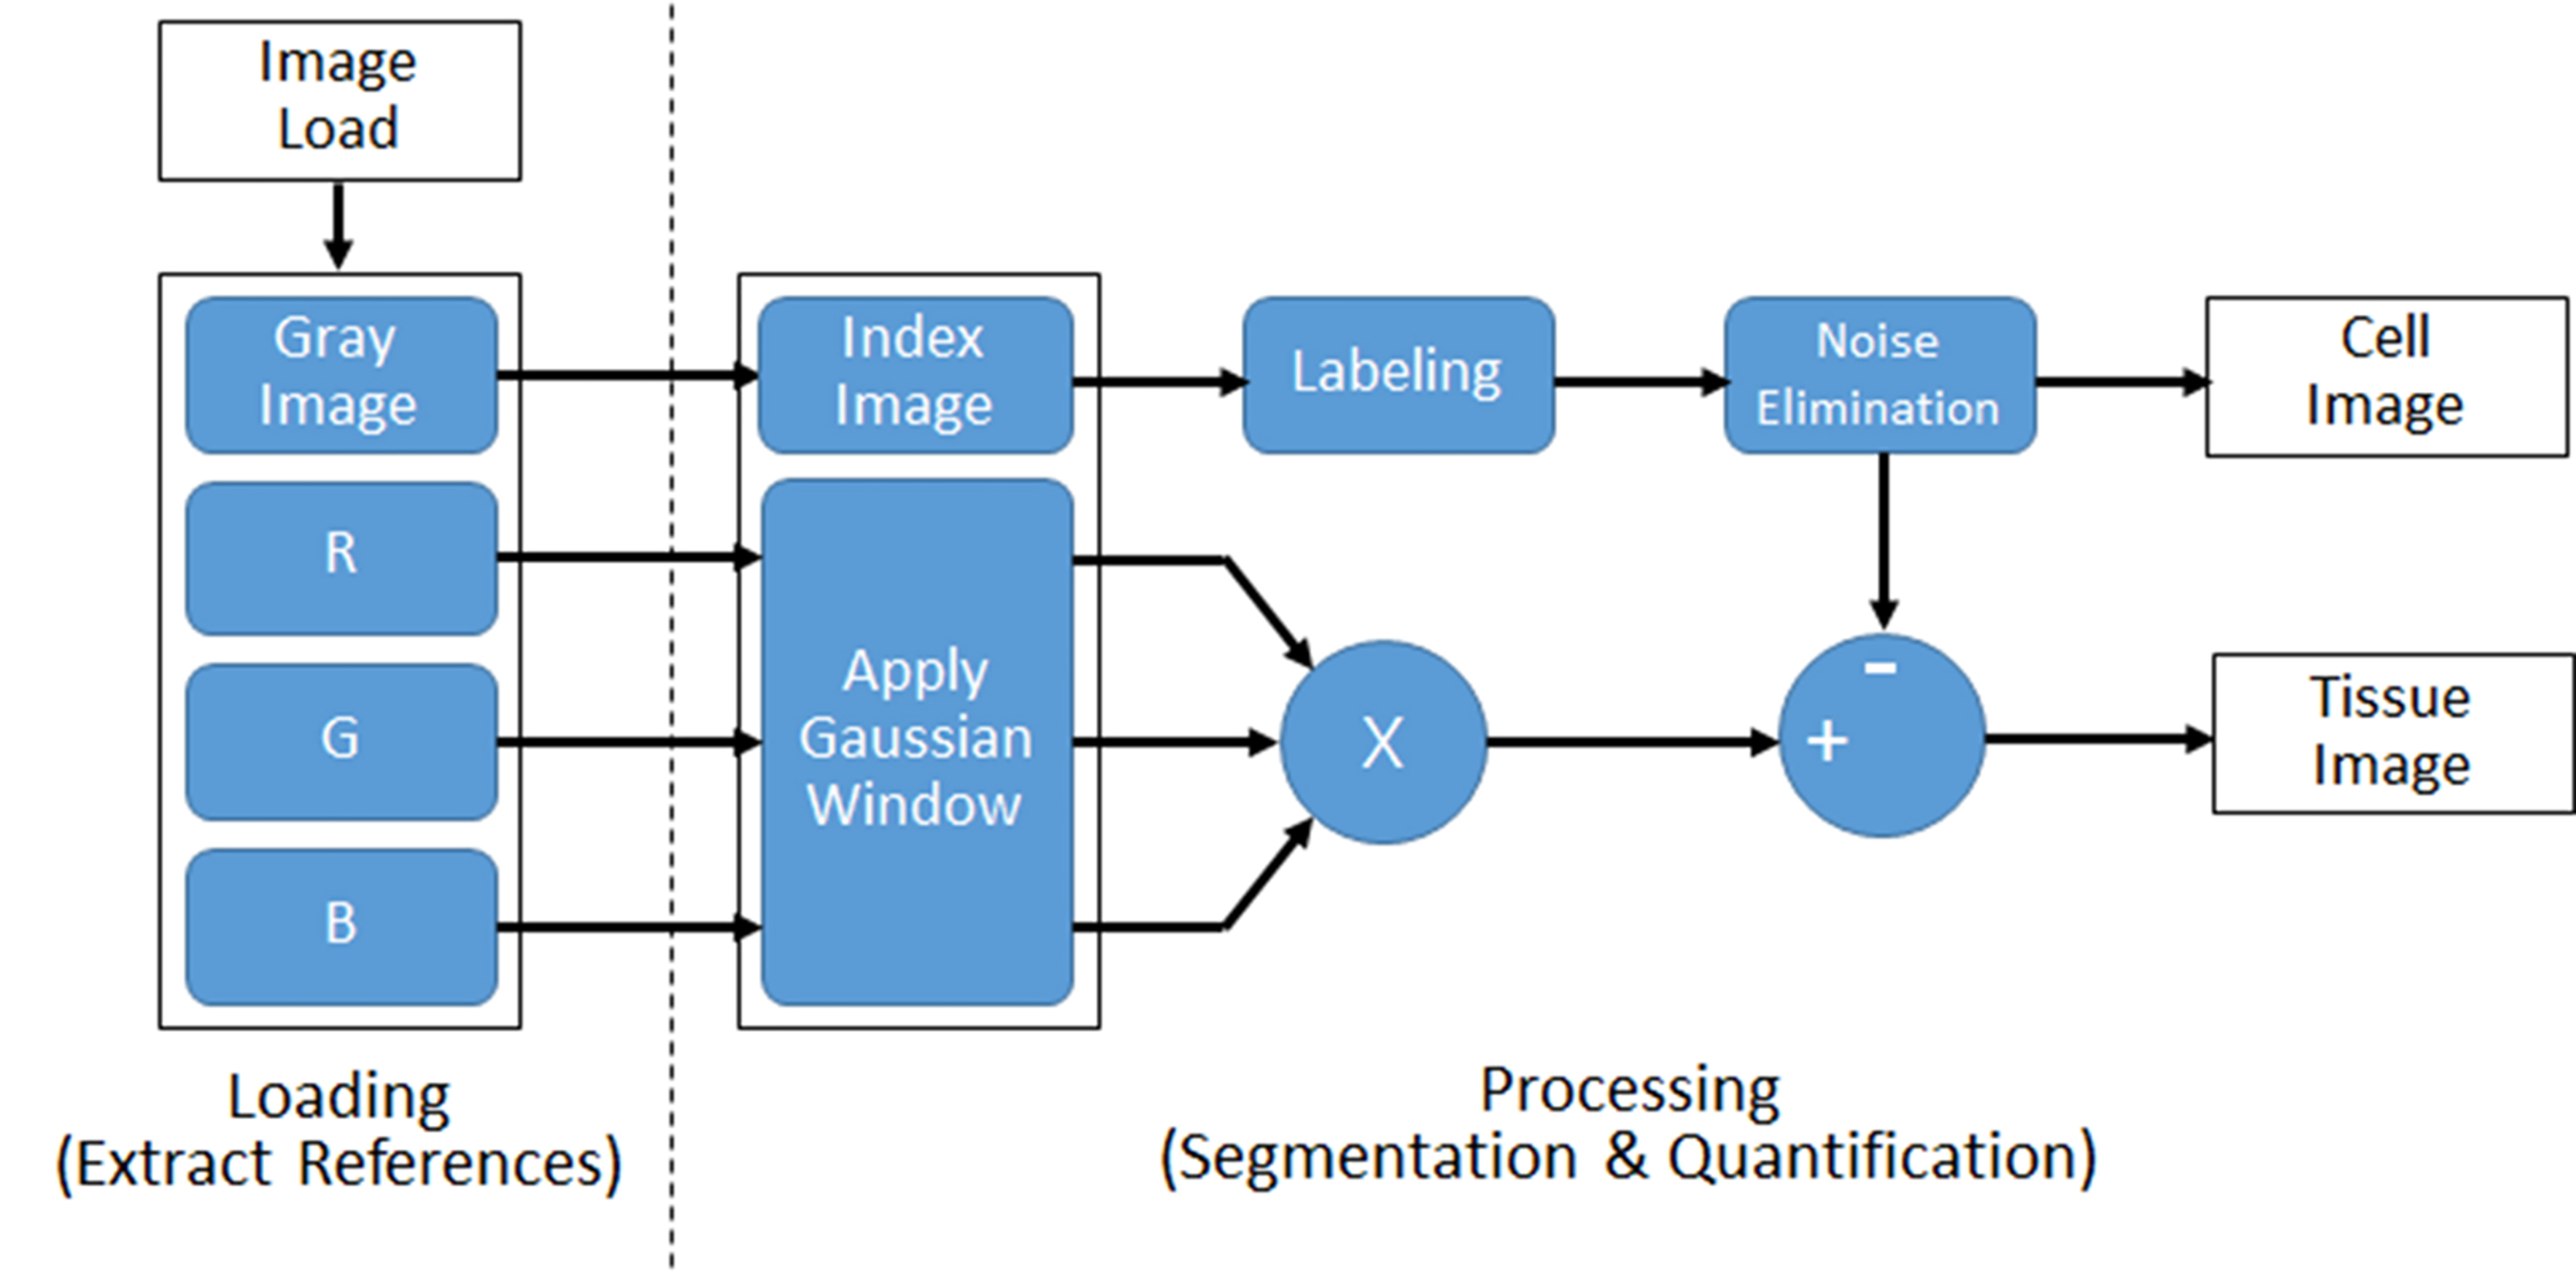 Flow of the proposed image processing algorithm for segmentation and quantification of cell and tissue from microscopic images.